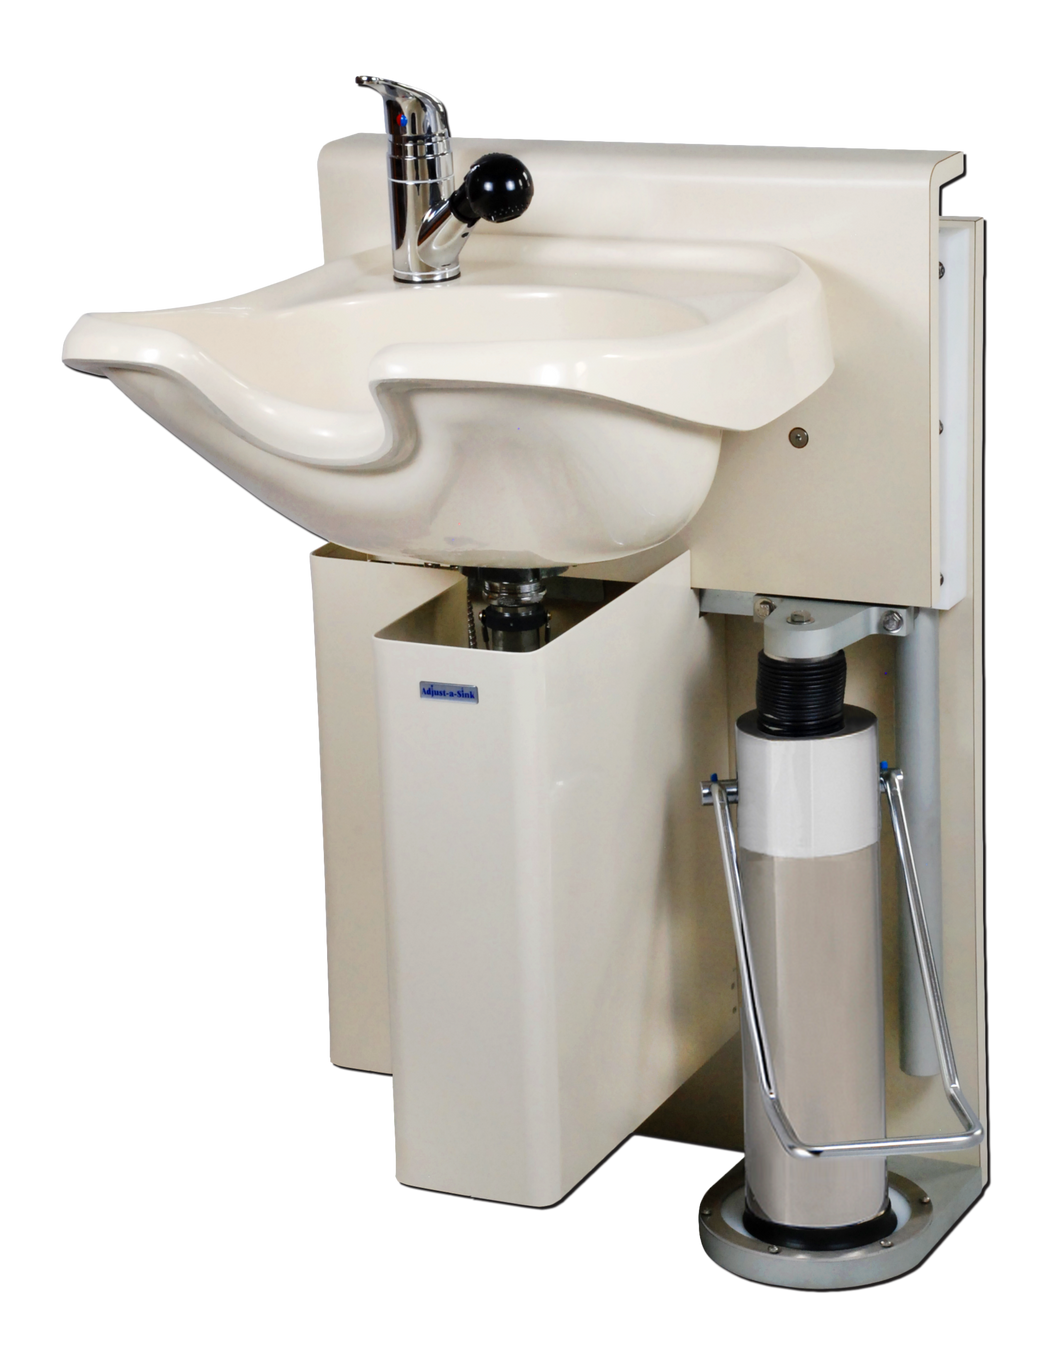 Adjust-a-Sink K100-A Height Adjustable Shampoo System with Comfort Fit Bowl - All Almond